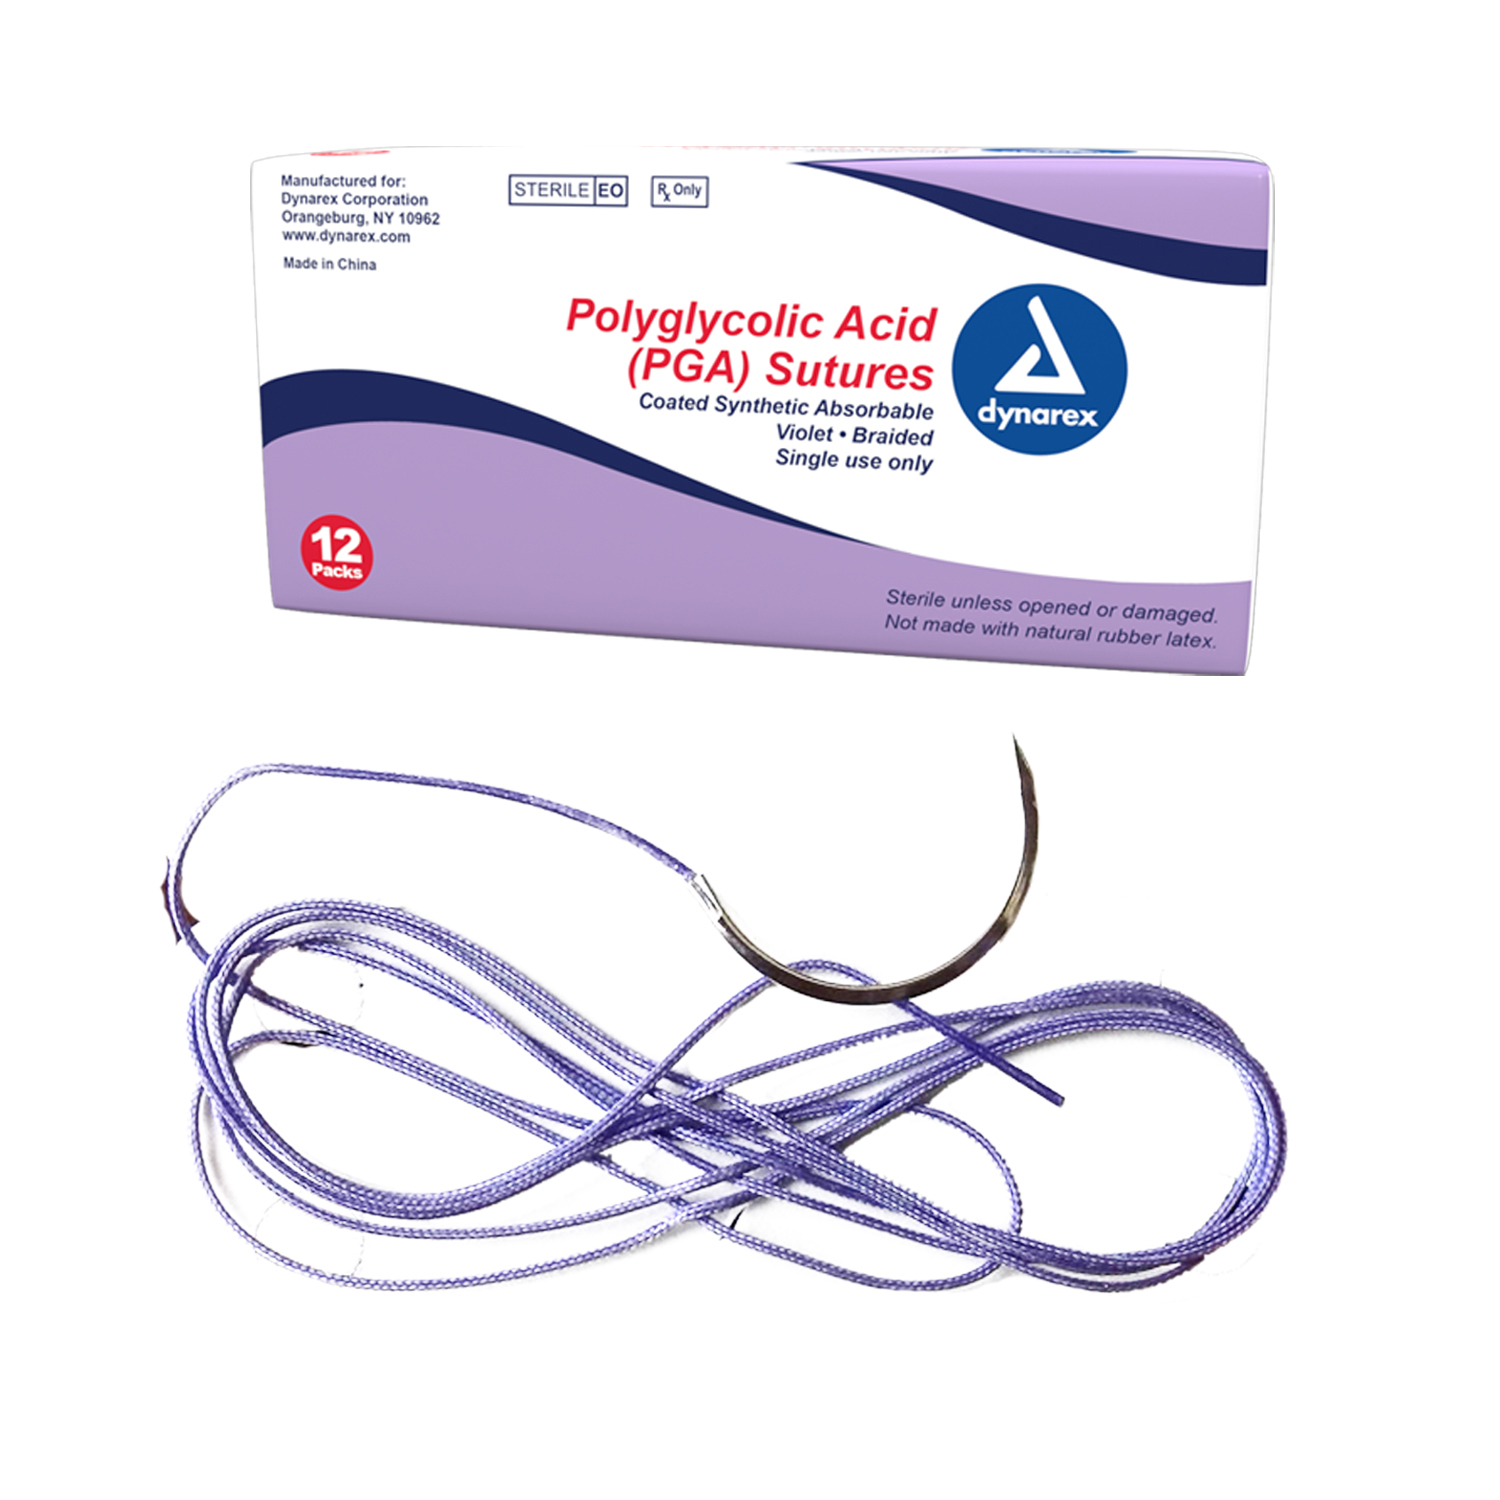 Braided (PGA) Sutures-Absorbable-Synthetic Violet, 5-0, C3 Needle, 18